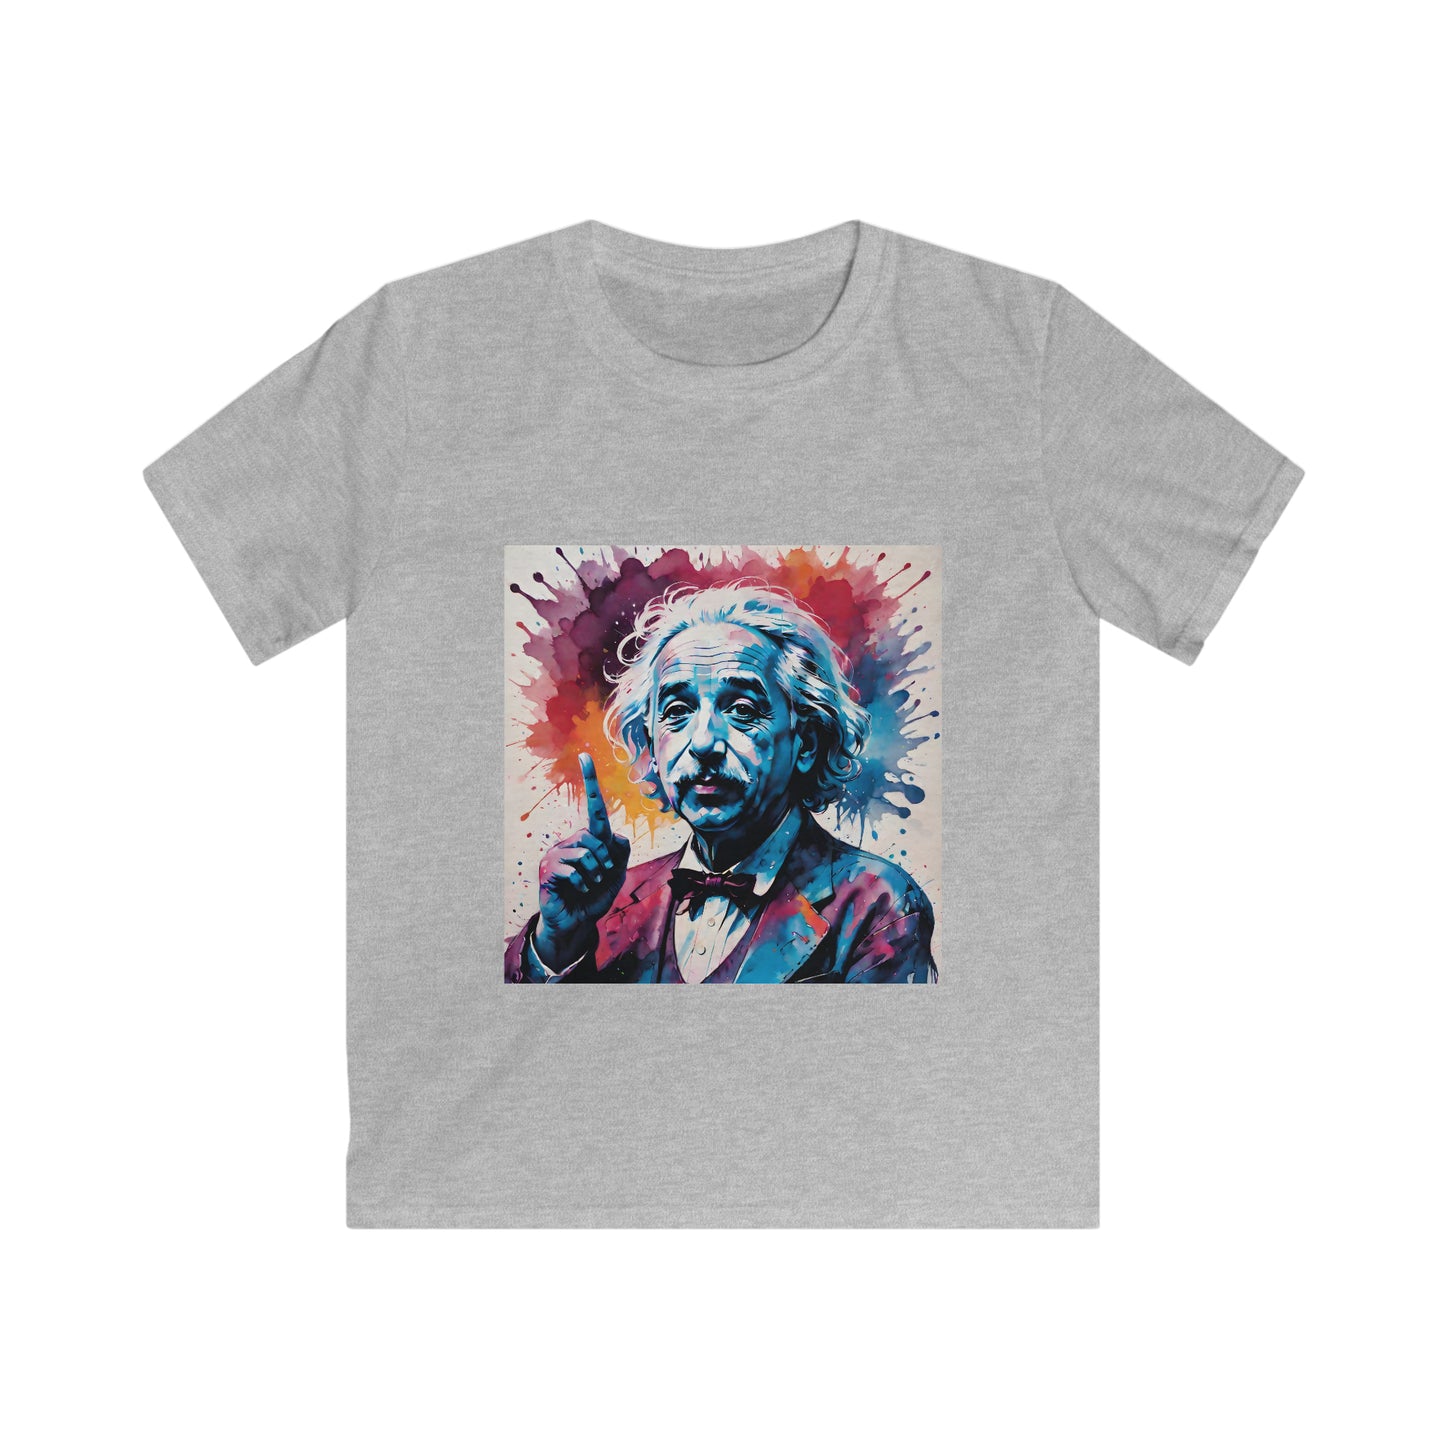 "The theory of everything" Single Print Kids Softstyle Tee